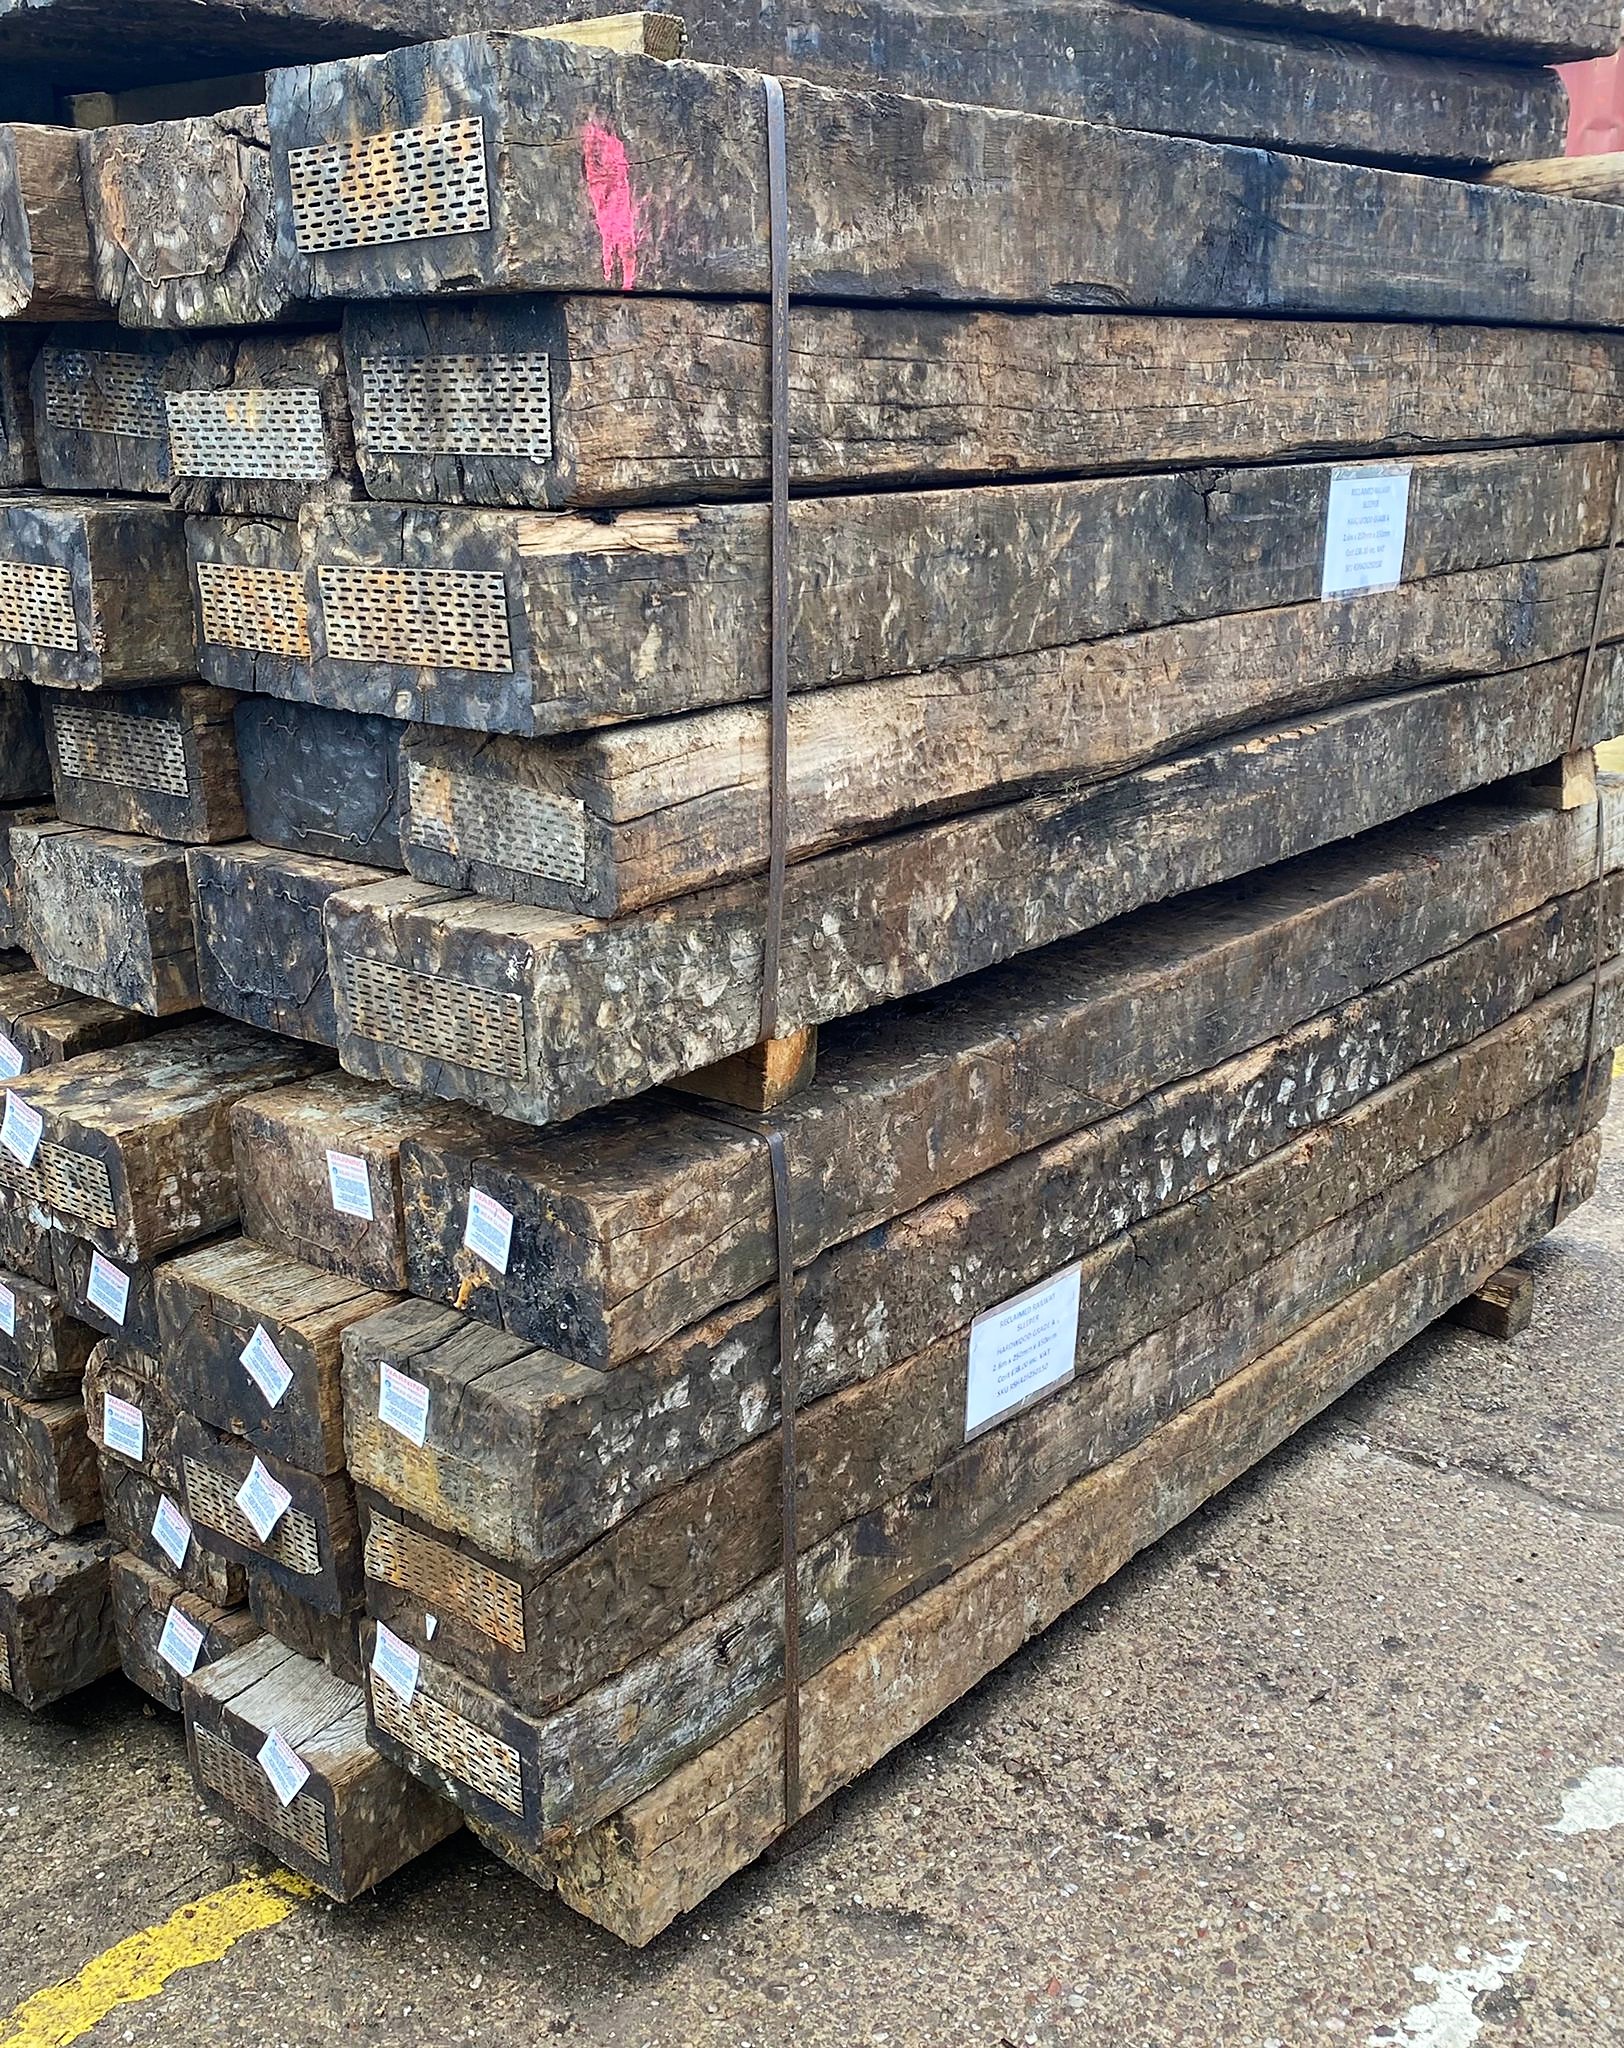 Reclaimed Hardwood Sleeper, Grade 'A'. Dimensions 2.6m x 250mm x 1500mm or 8'6" x  10" x 6" Weight 100kg approximately. Reclaimed Hardwood Sleeper are a popular choice for garden structures, planters, steps, walls and many more. These sleepers vary slightly in lengths and thicknesses as they're reclaimed.  They're available from one to large quantities. When a greater depth or length is required sleepers can be screwed and fixed together.